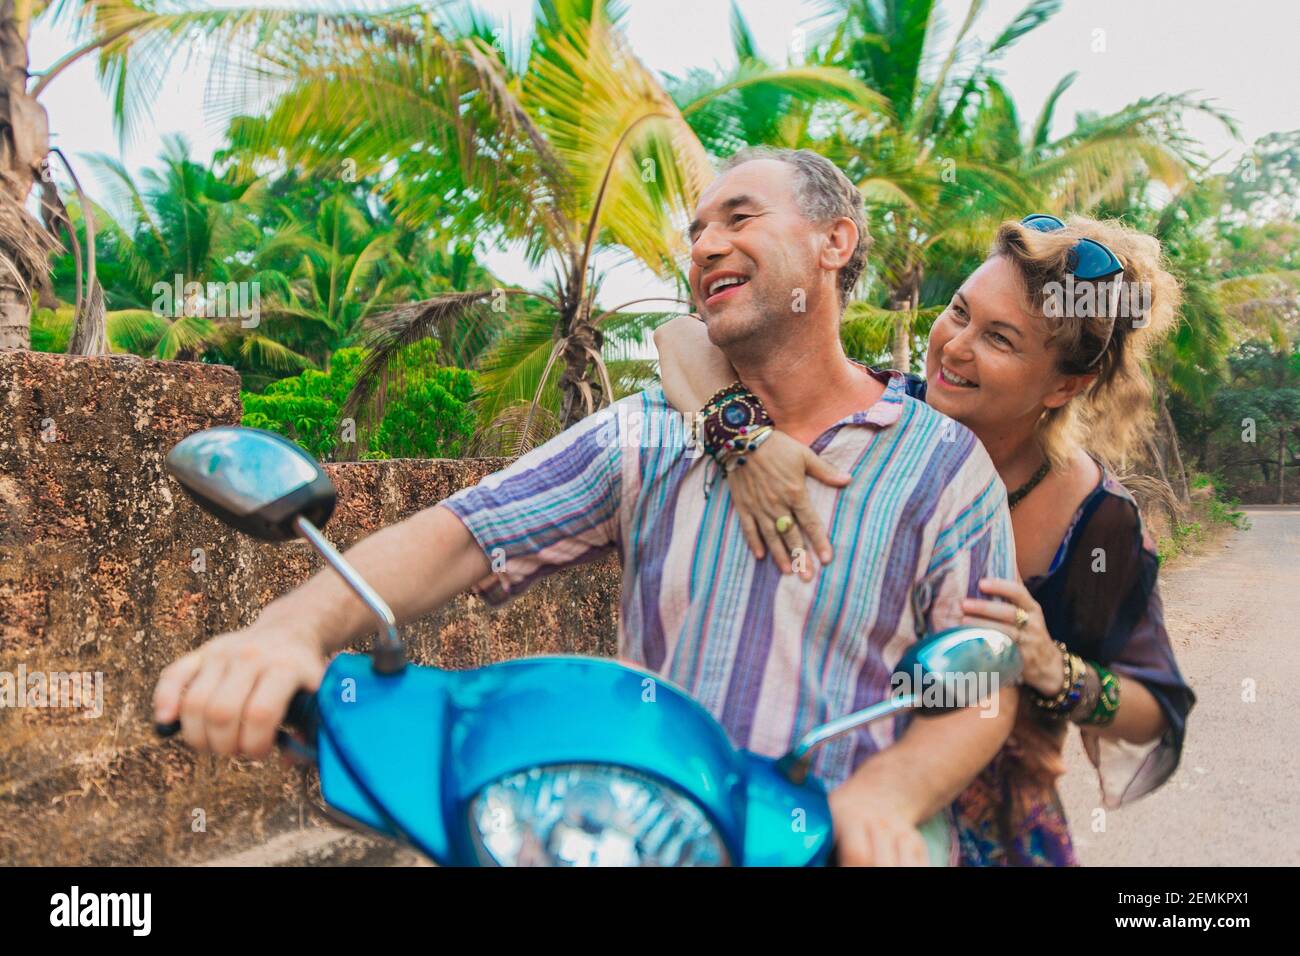 Elderly couple on scooter travel summertime dating relationship concept india Stock Photo